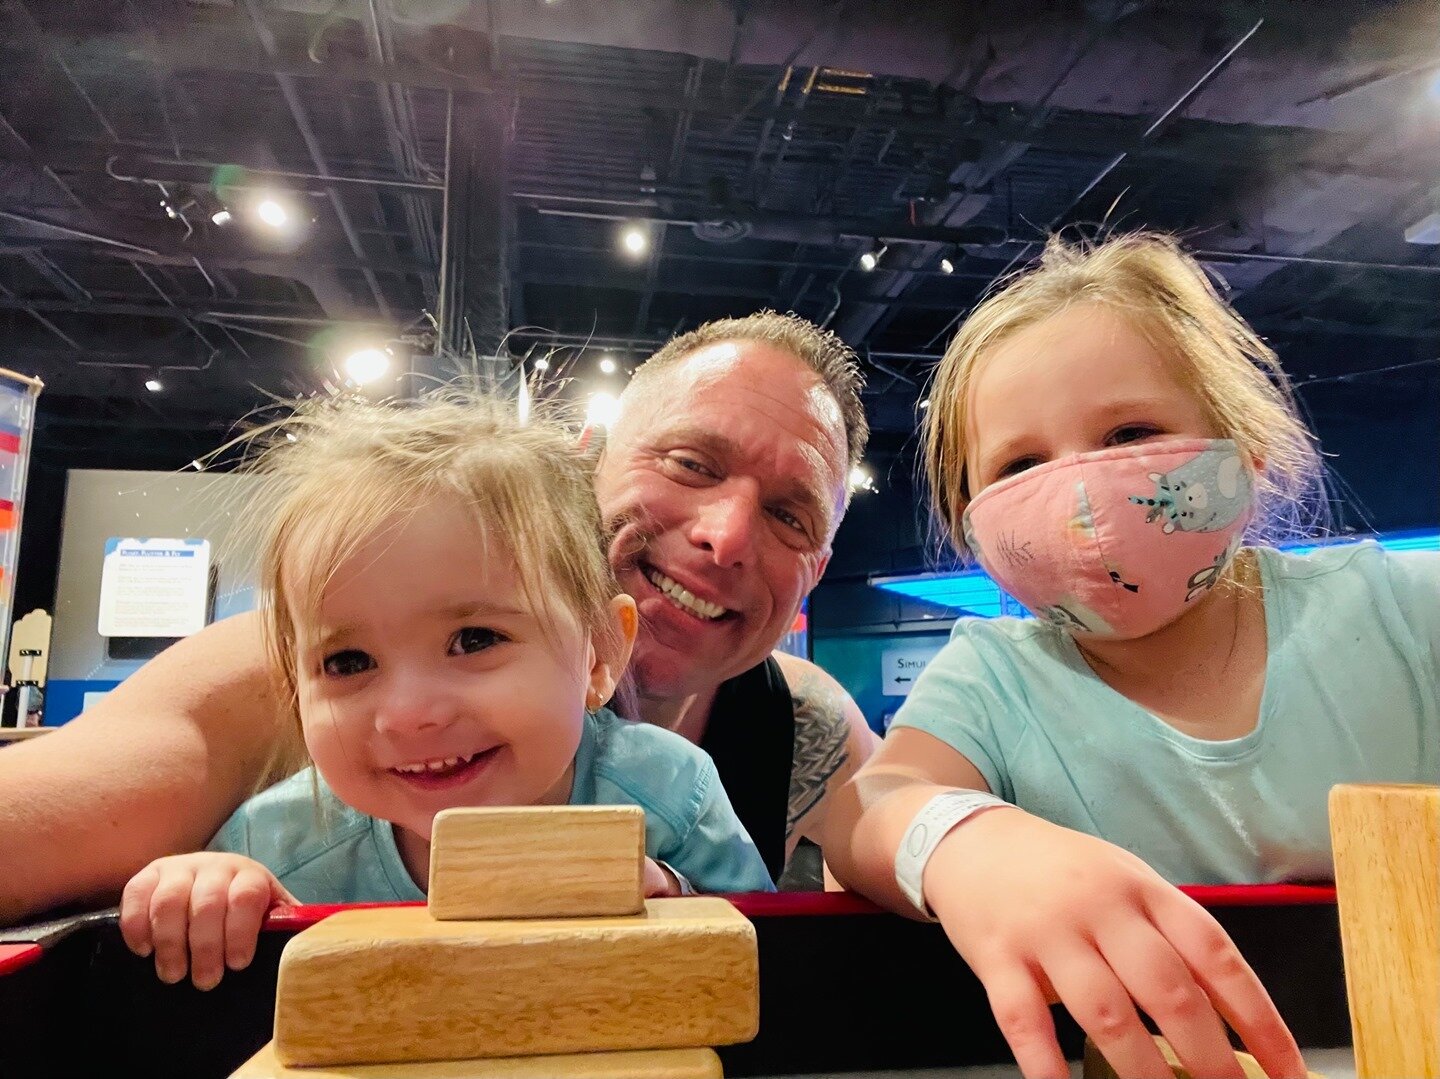 Tuesday is my &ldquo;day off&rdquo; and it&rsquo;s also &ldquo;Daddy Daughter Day&rdquo;. 👨&zwj;👧&zwj;👧

This week we went back to the Orlando Science Center 🔬 

Do you take a day each week to do One on One things with your kids? 🗓

#dad 
#fathe